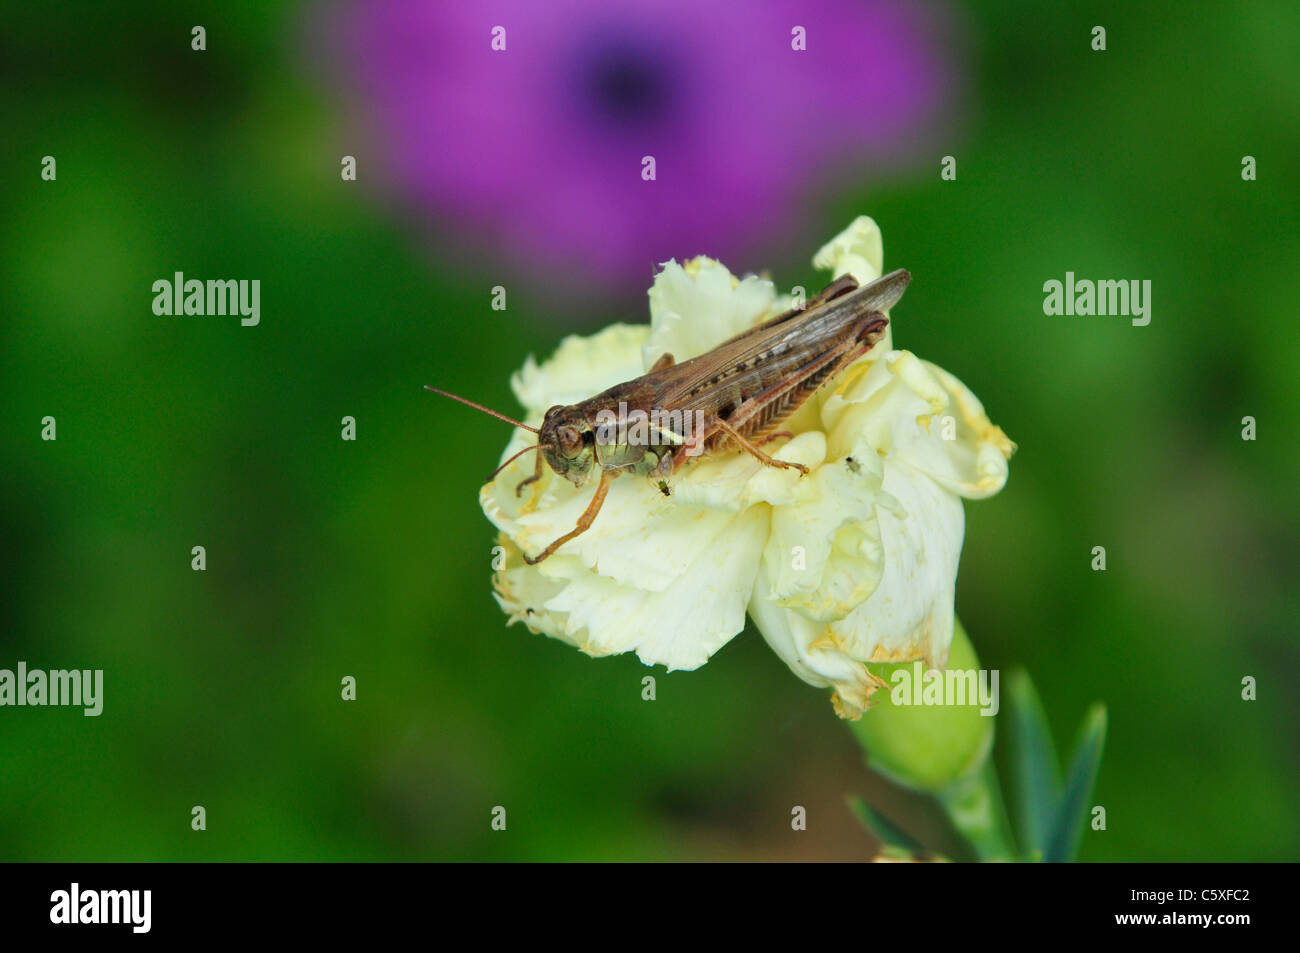 A common grasshopper pictured on a dying carnation. Stock Photo